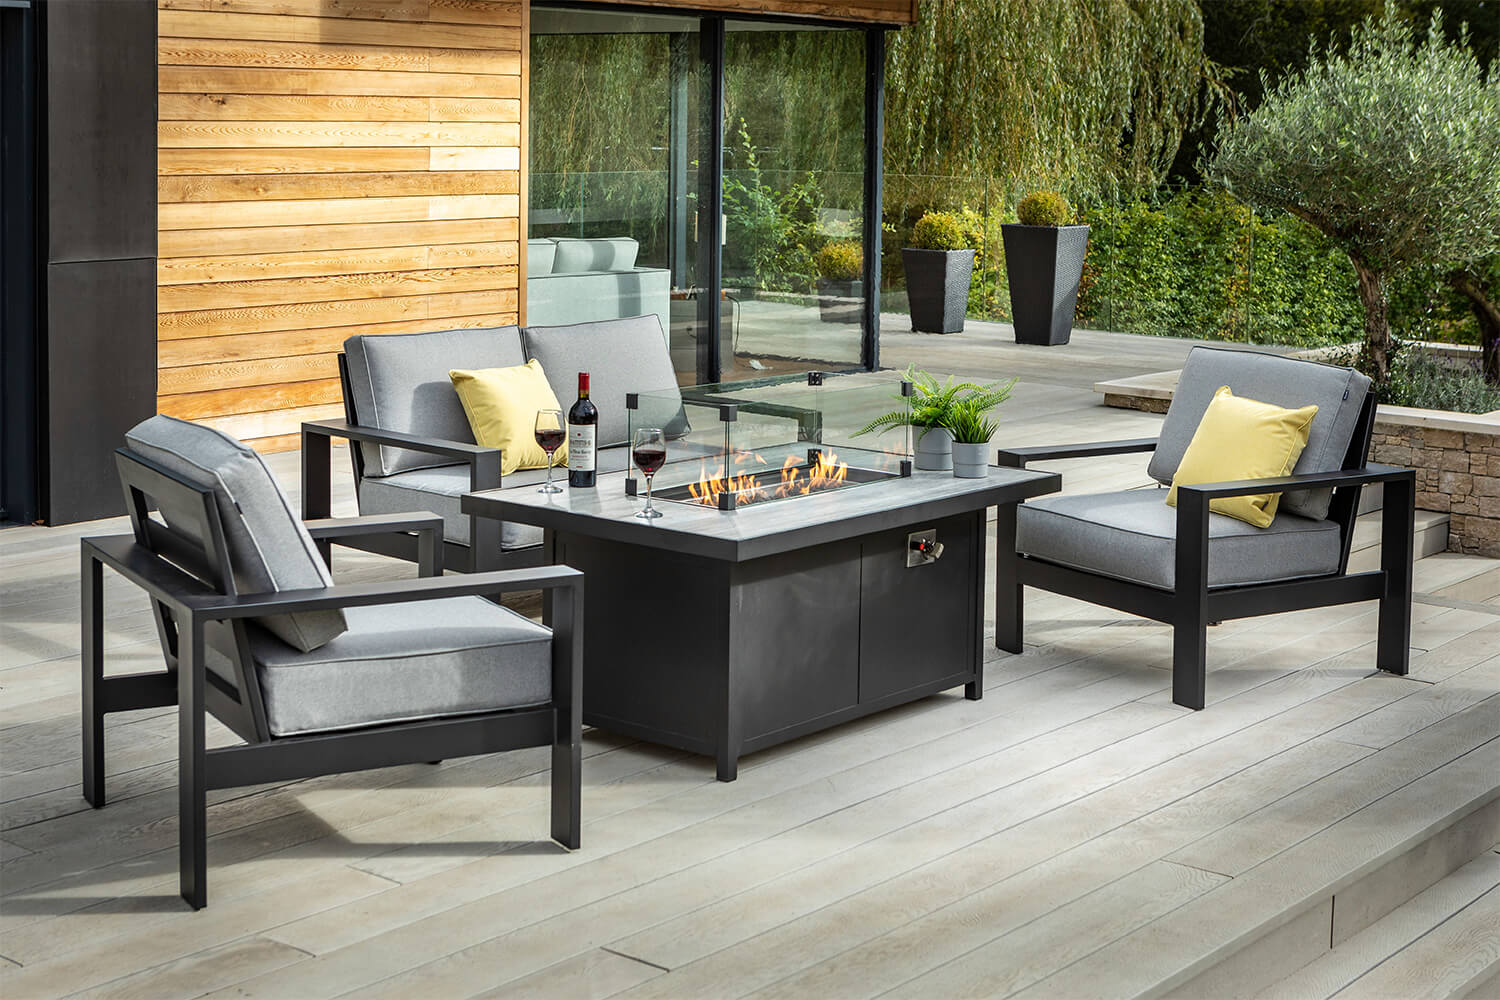 Hartman Atlas 2 Seater Sofa Lounge Set, Garden Furniture With Fire Pit In Middle Of Table